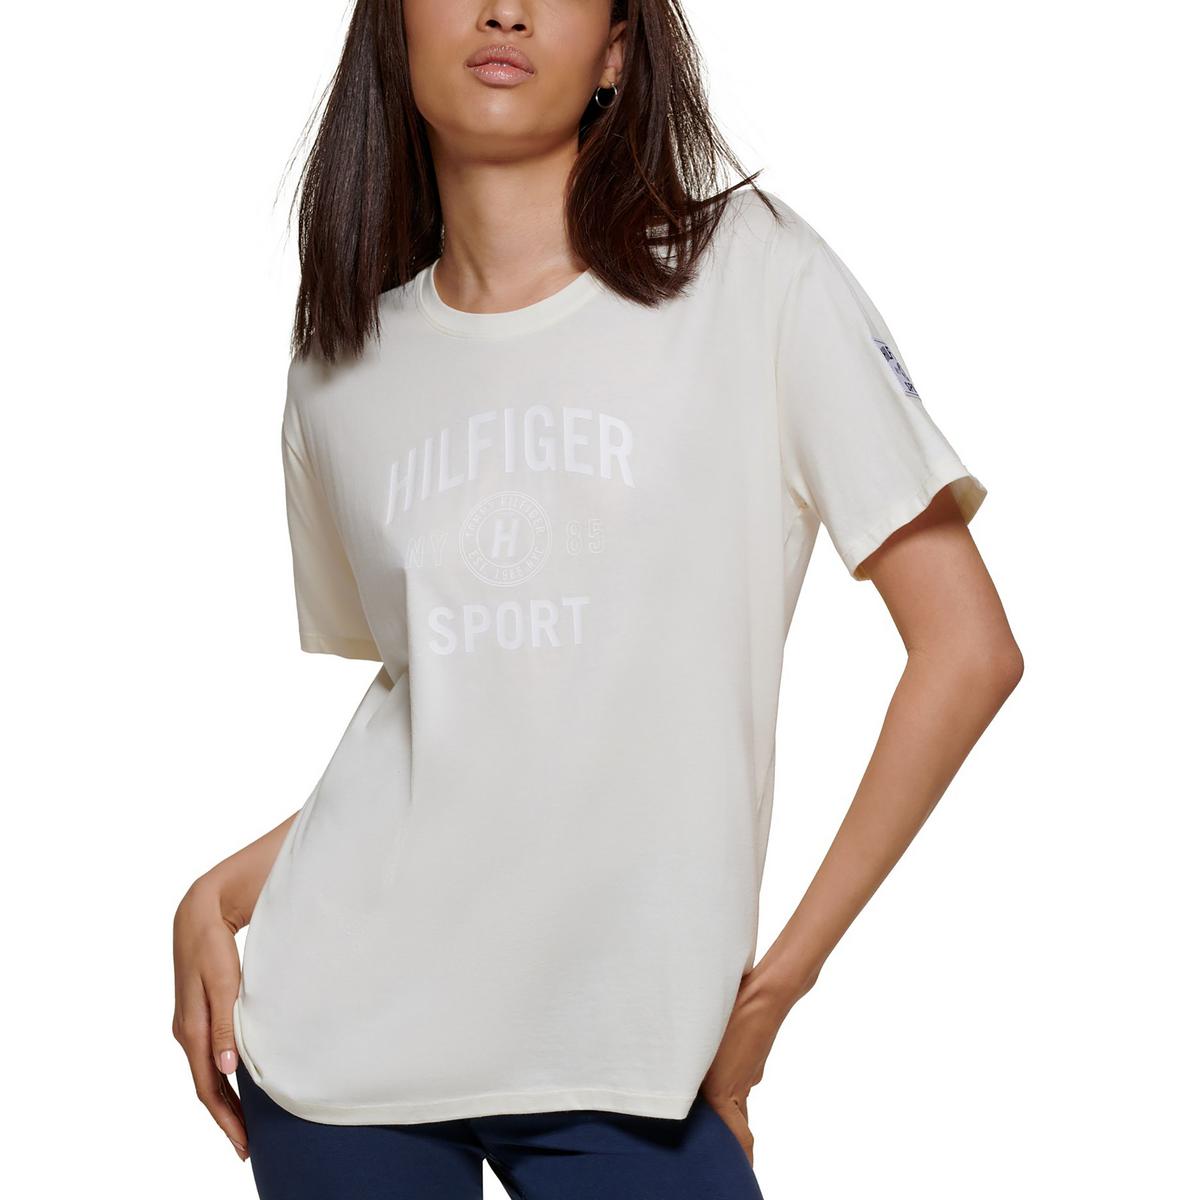 Tommy Hilfiger Sport Womens Fitness Workout Shirts & Tops Athletic BHFO 3852